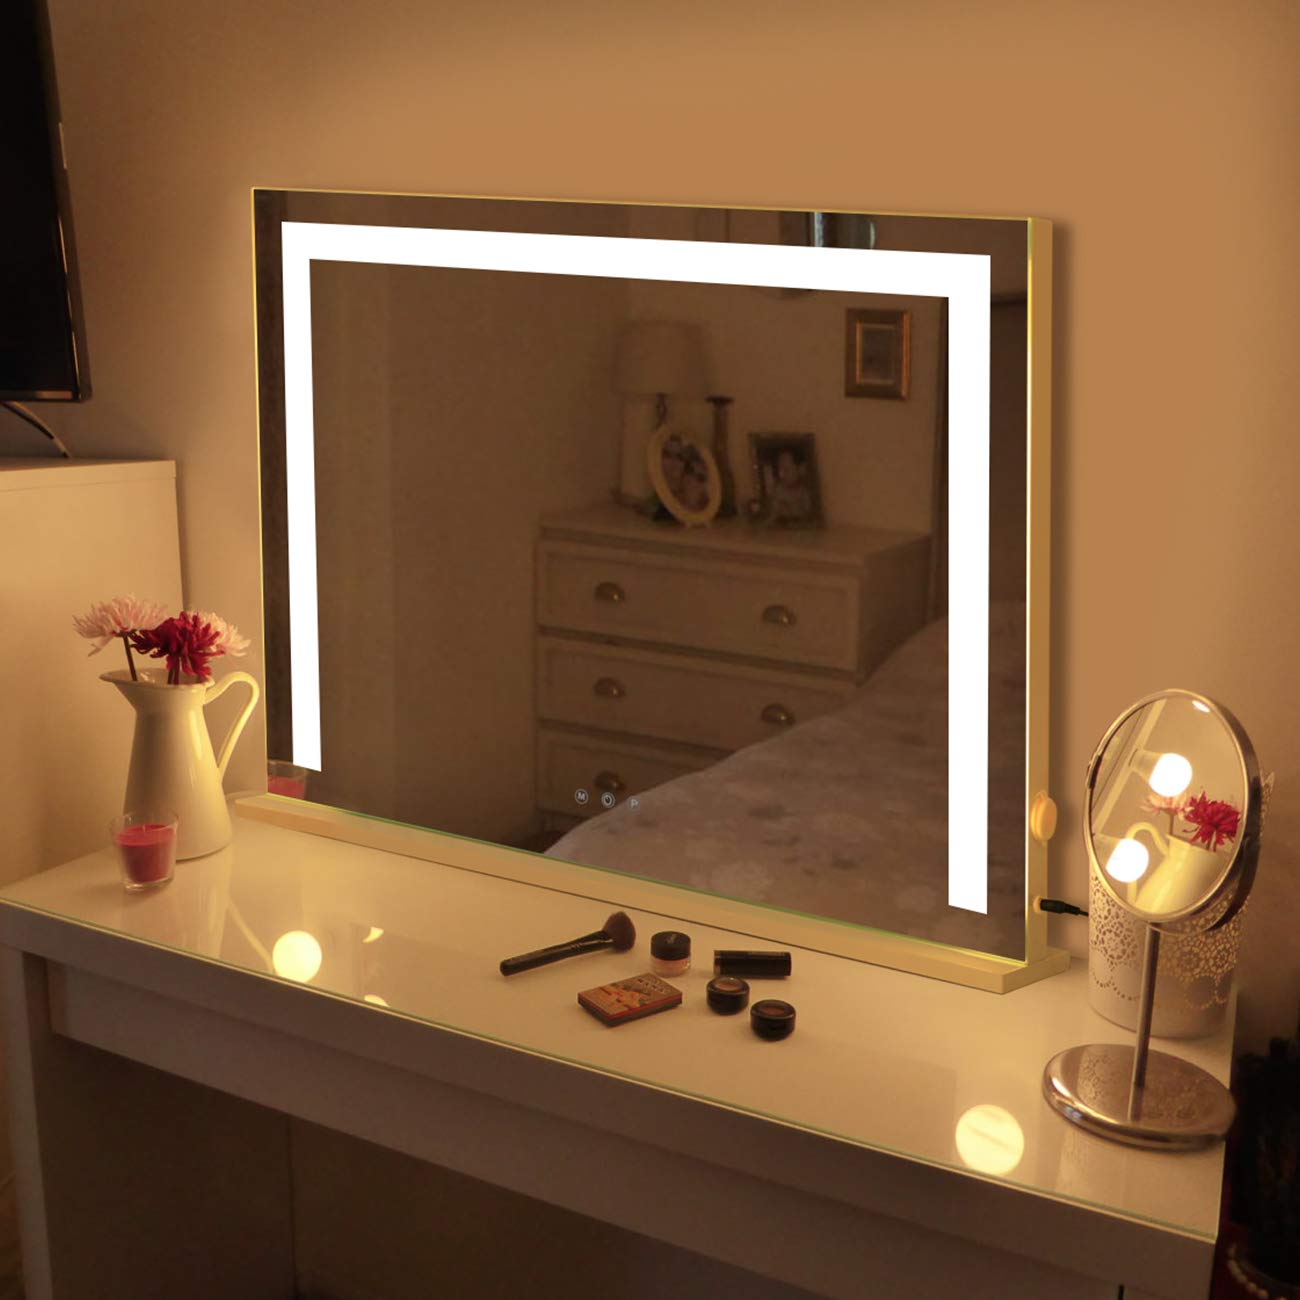 HOMPEN Makeup Mirror with Lights, Lighted Vanity Mirror, Table Top Lighted Beauty Mirror, Dimmable LED Light Strips, Hollywood Style Mirror